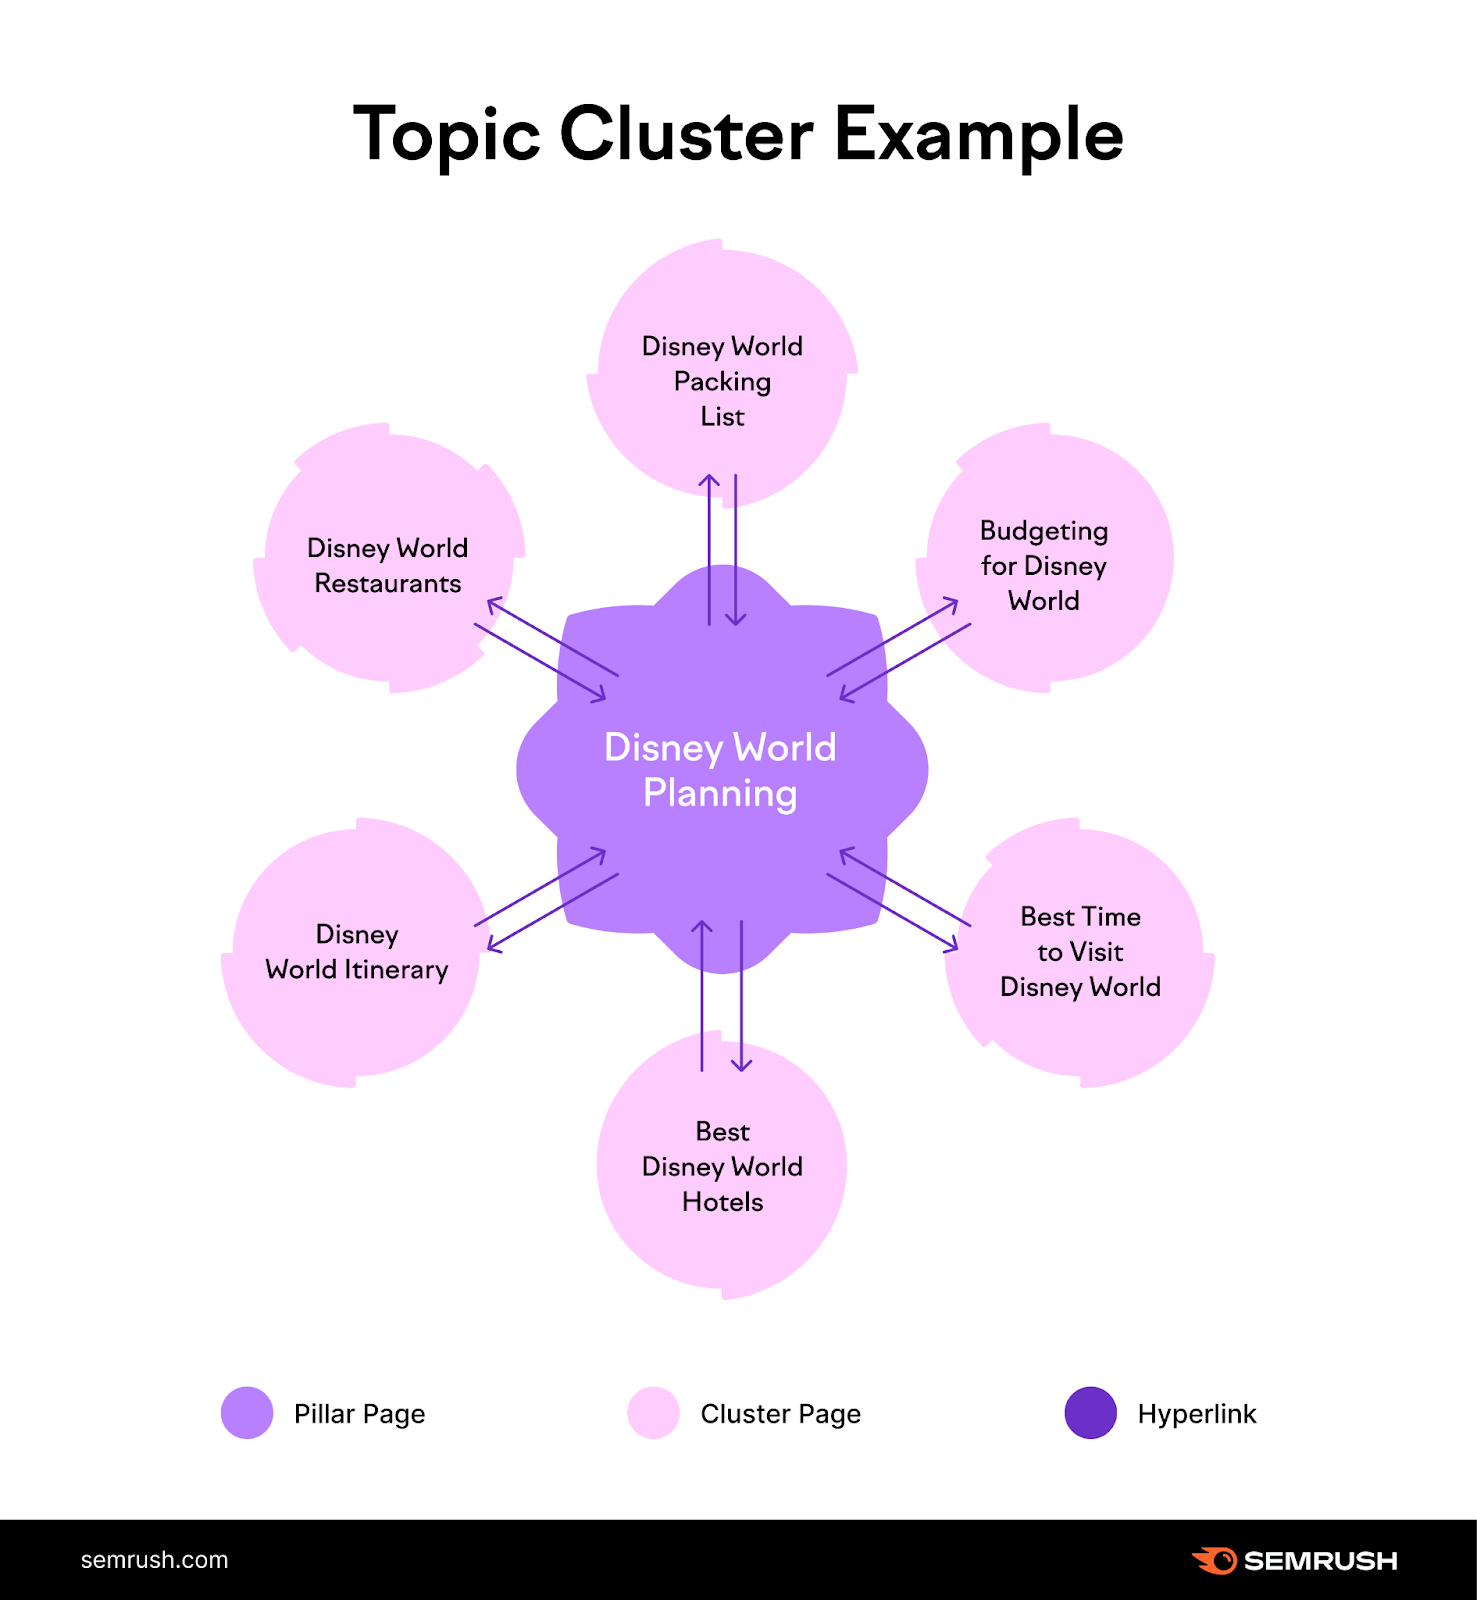 Topic cluster example for "Disney World Planning"